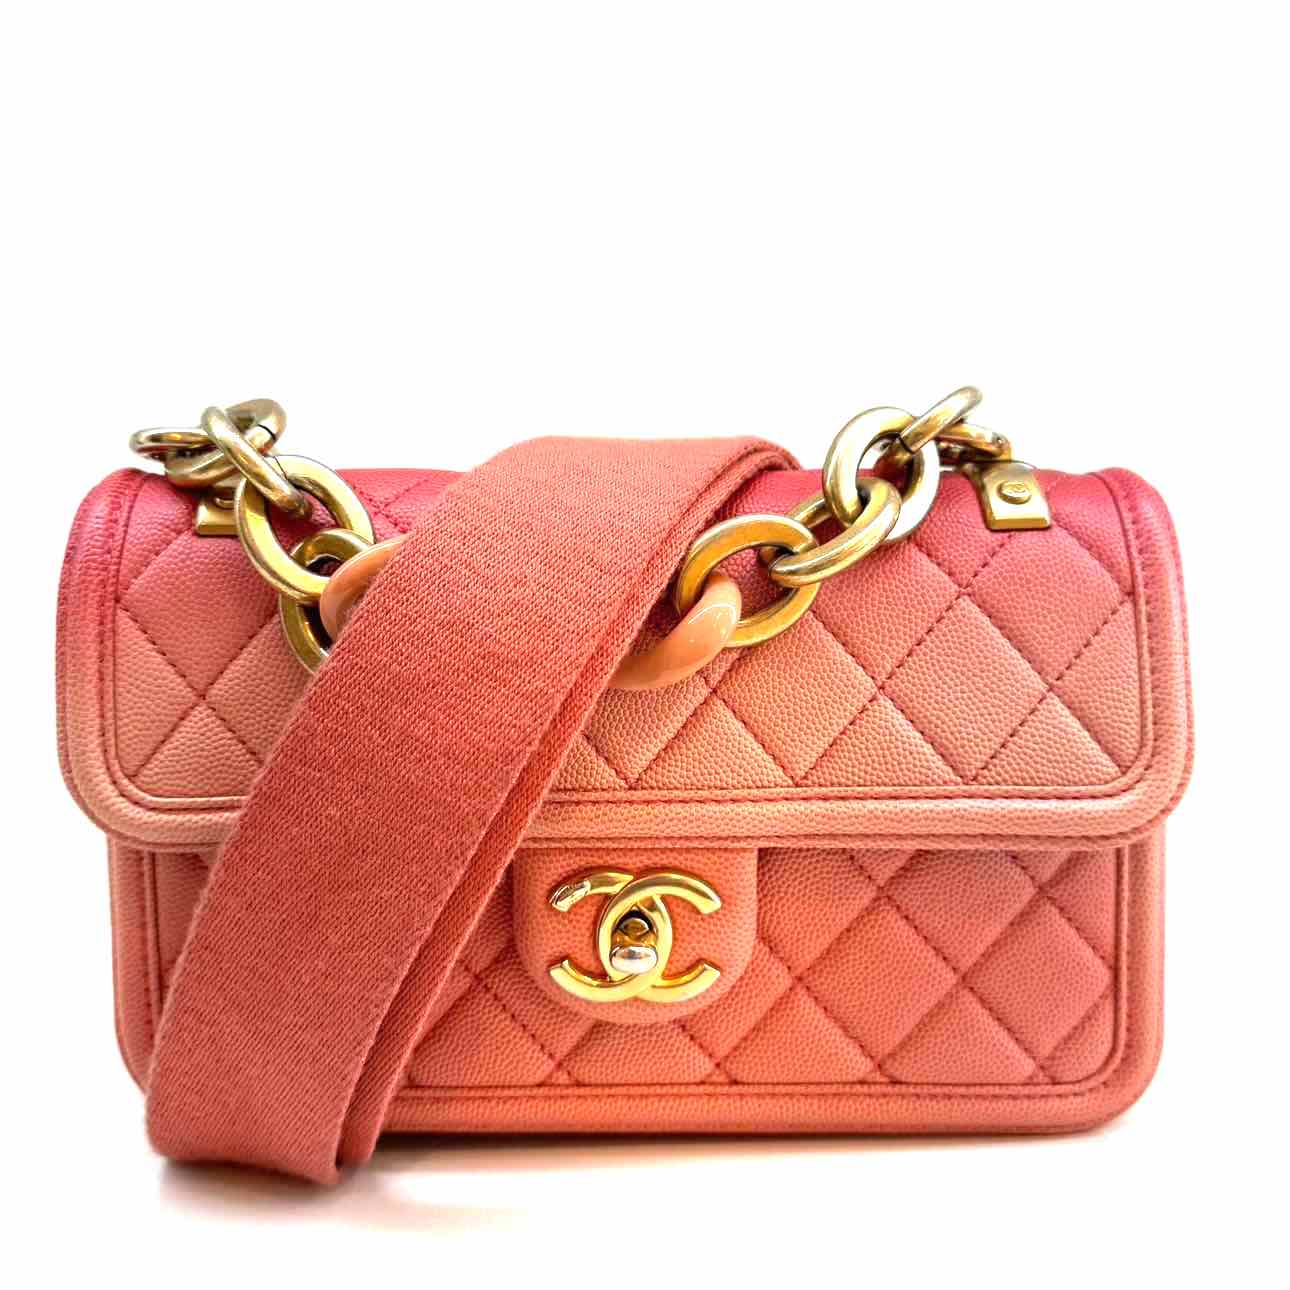 CHANEL Caviar Quilted Sunset On The Sea Medium Flap Bag Peach